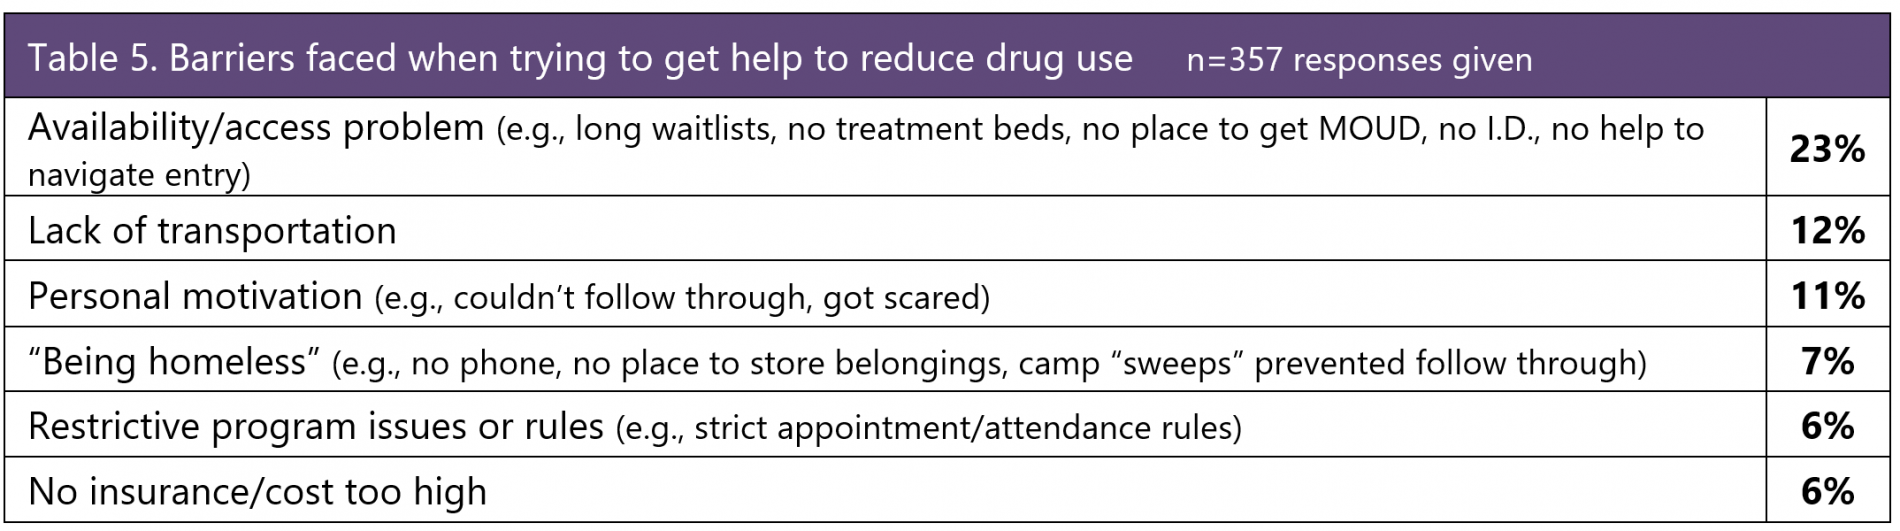 Table 5: Barriers faced when trying to get help to reduce drug use. Availability/access problem (like long wait lists, no treatment beds, no place to get MOUD, no ID, no help to navigate entry): 23% Lack of transportation: 12%, personal motivation (couldn't follow through, got scared, e.g.): 11%, Being homeless (e.g. no phone, nowhere to store belongings, camp "sweeps" prevented follow through): 7%, Restrictive program issues or rules (e.g. strict appointment/attendance rules): 6%, no insurance/cost too high: 6%